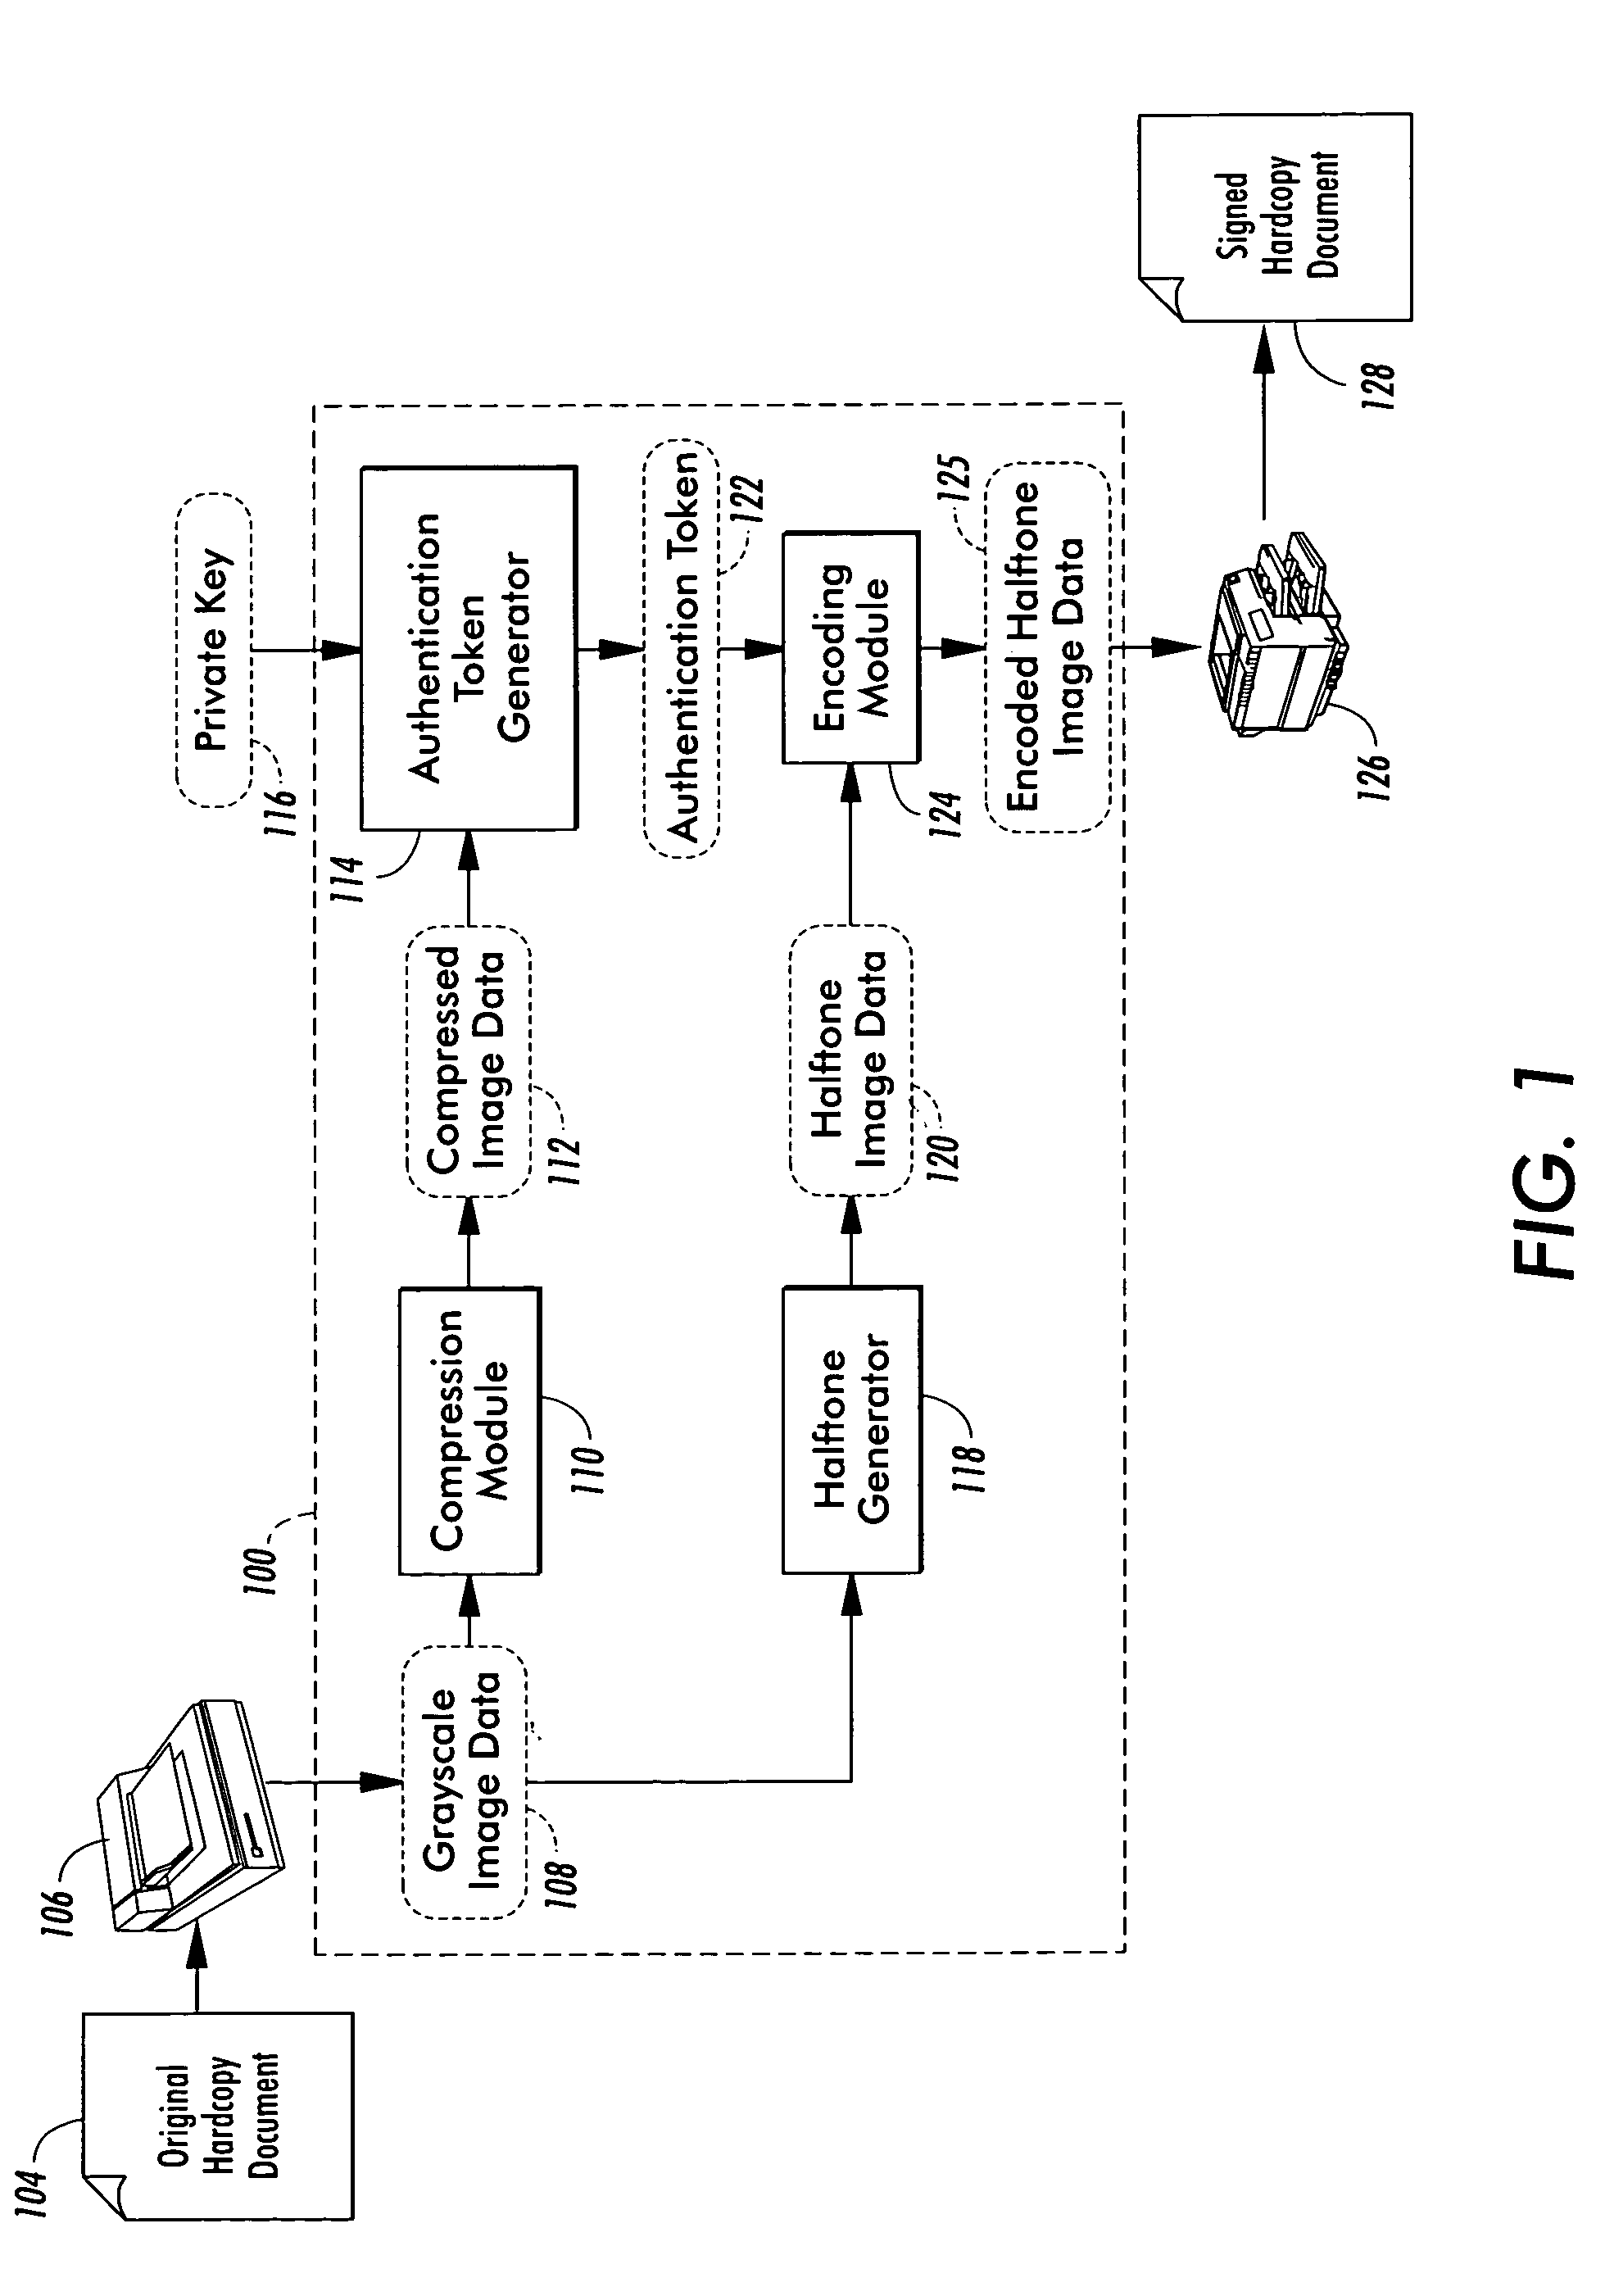 System for authenticating hardcopy documents